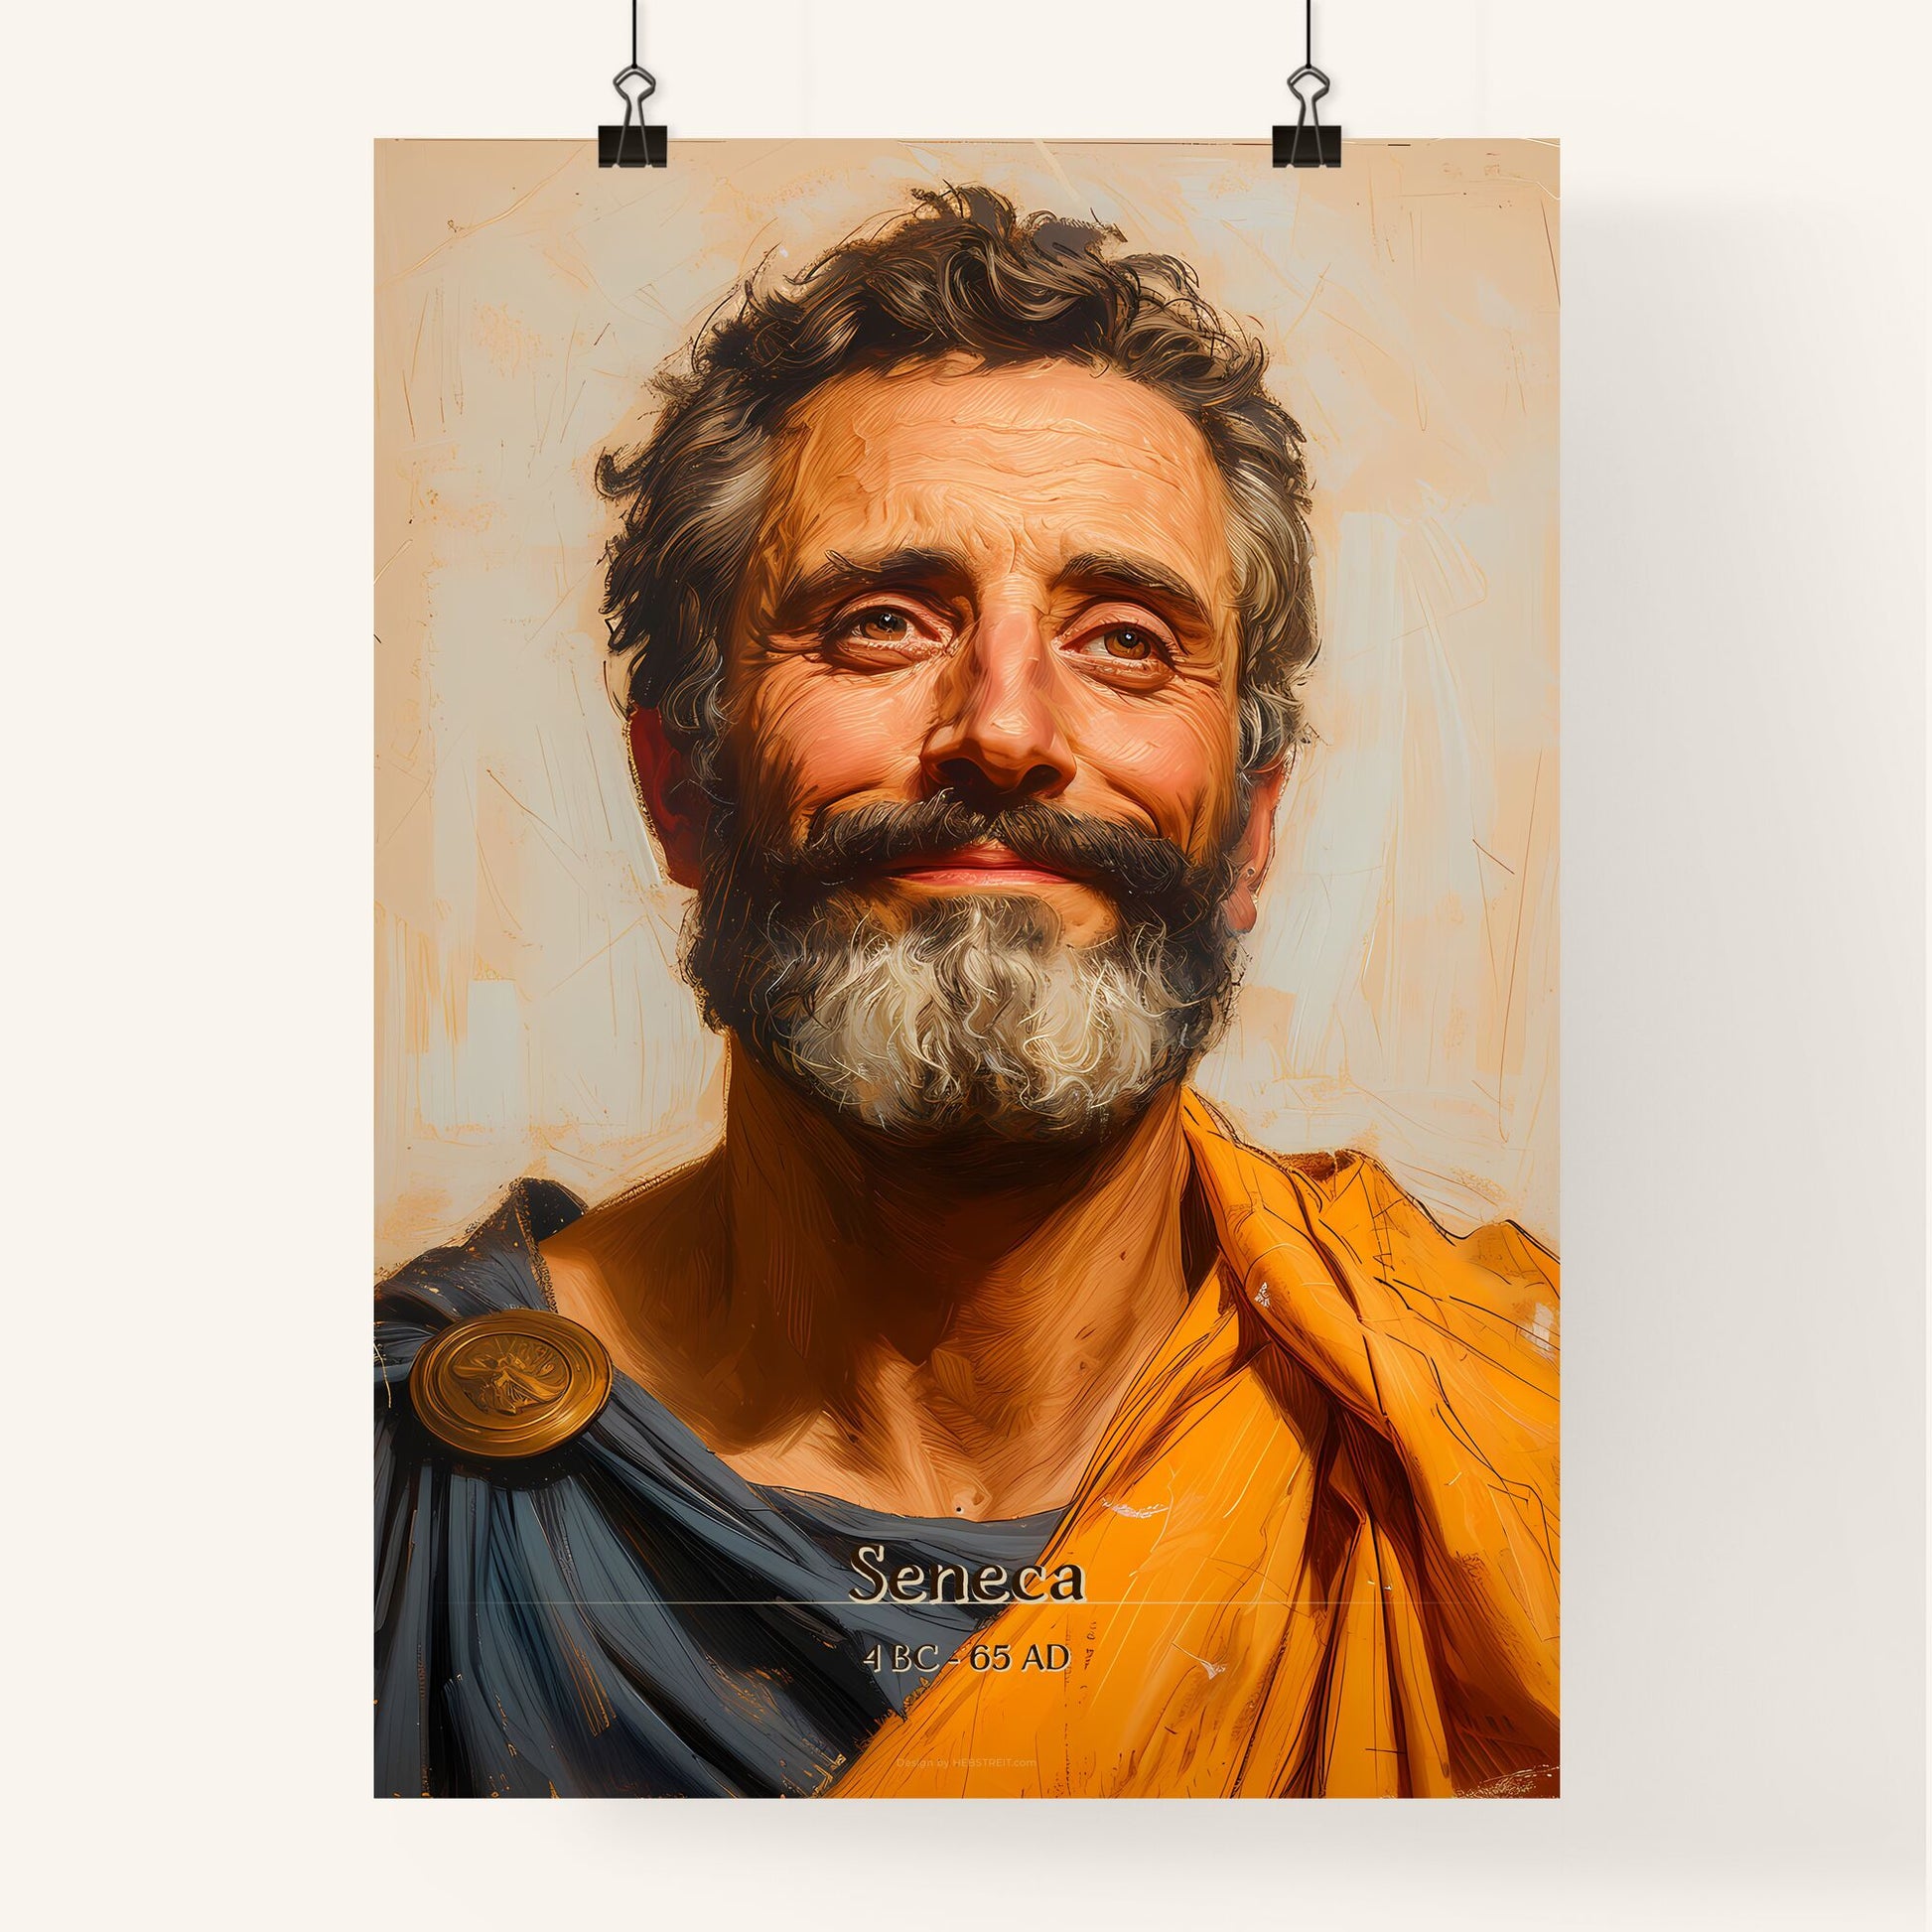 Seneca, 4 BC - 65 AD, A Poster of a man with a beard and a yellow robe Default Title